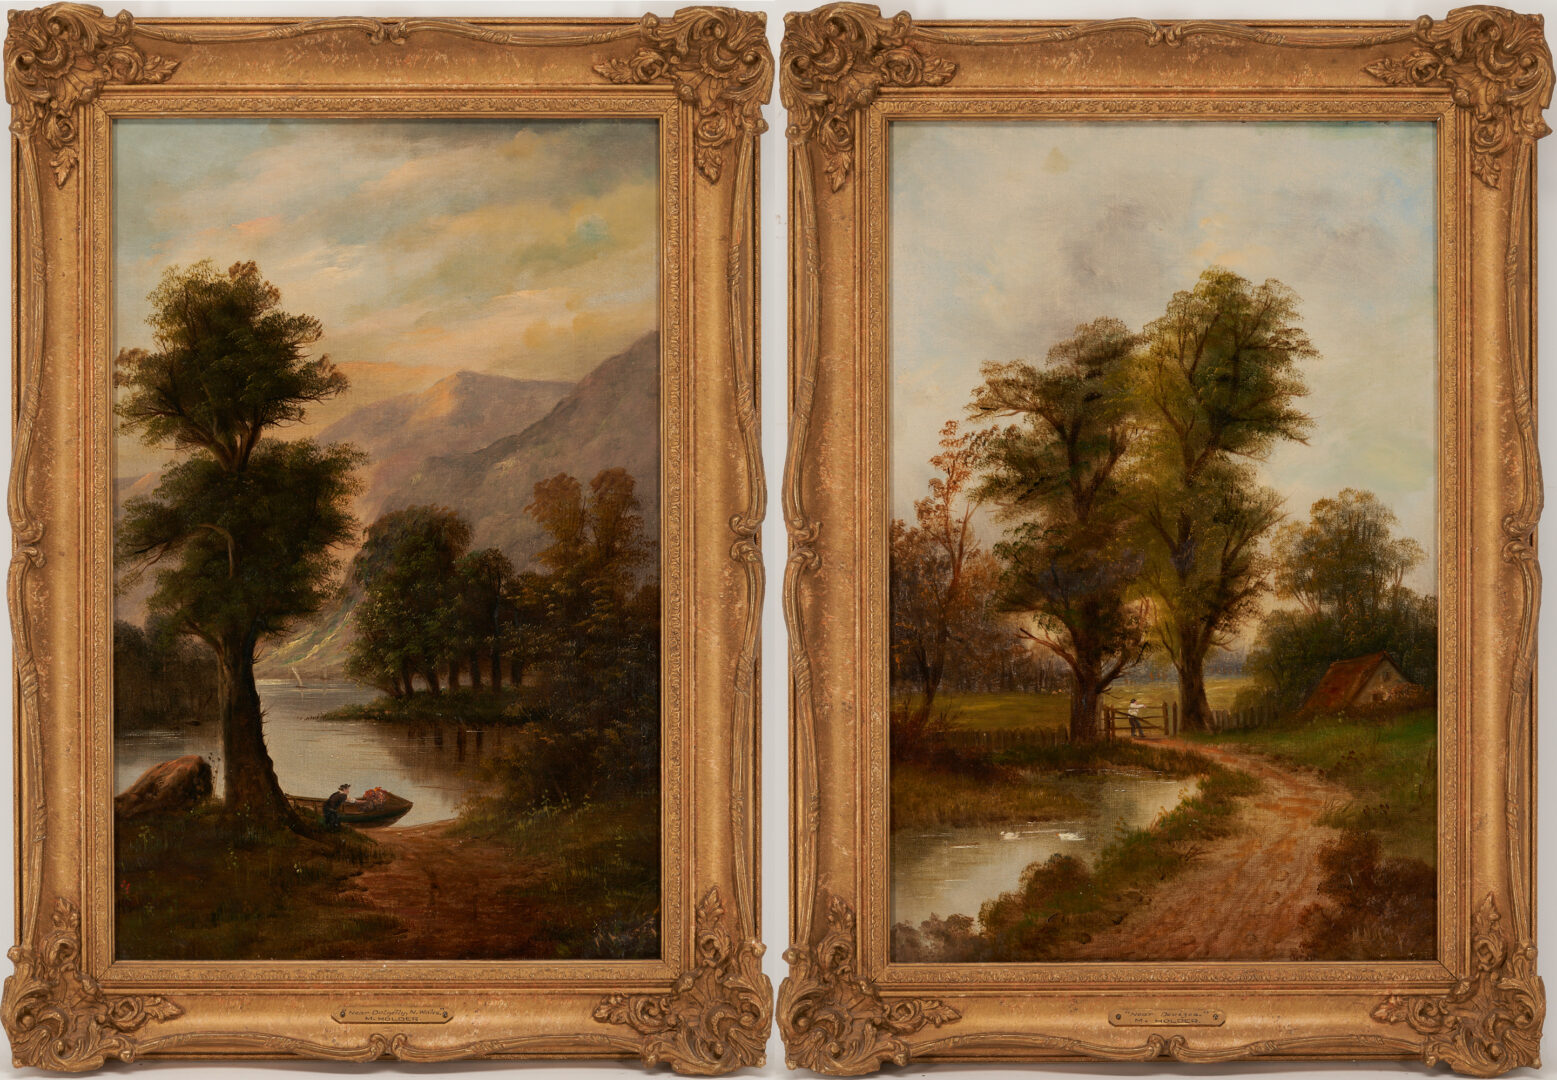 Lot 708: Pair of British Landscape Oil on Canvas Paintings, M. Holder